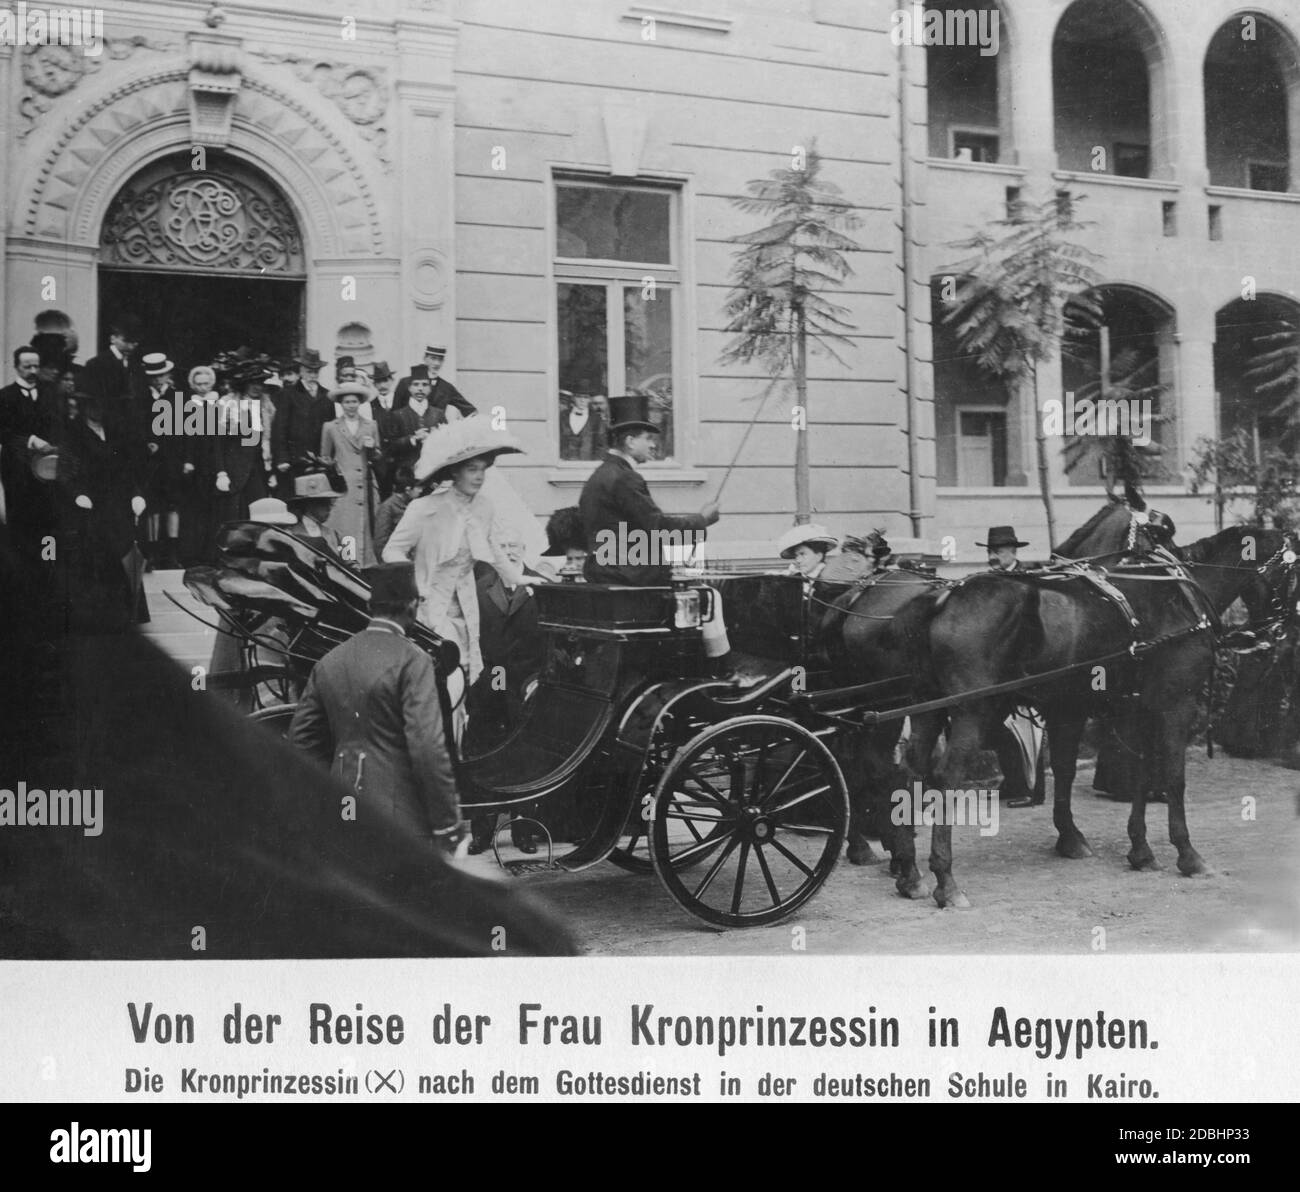 Crown Princess Cecilie of Prussia (born in Mecklenburg, centre, light-coloured dress) leaves the German school in Cairo after a service and gets into a carriage. She made a journey there in 1911. Stock Photo